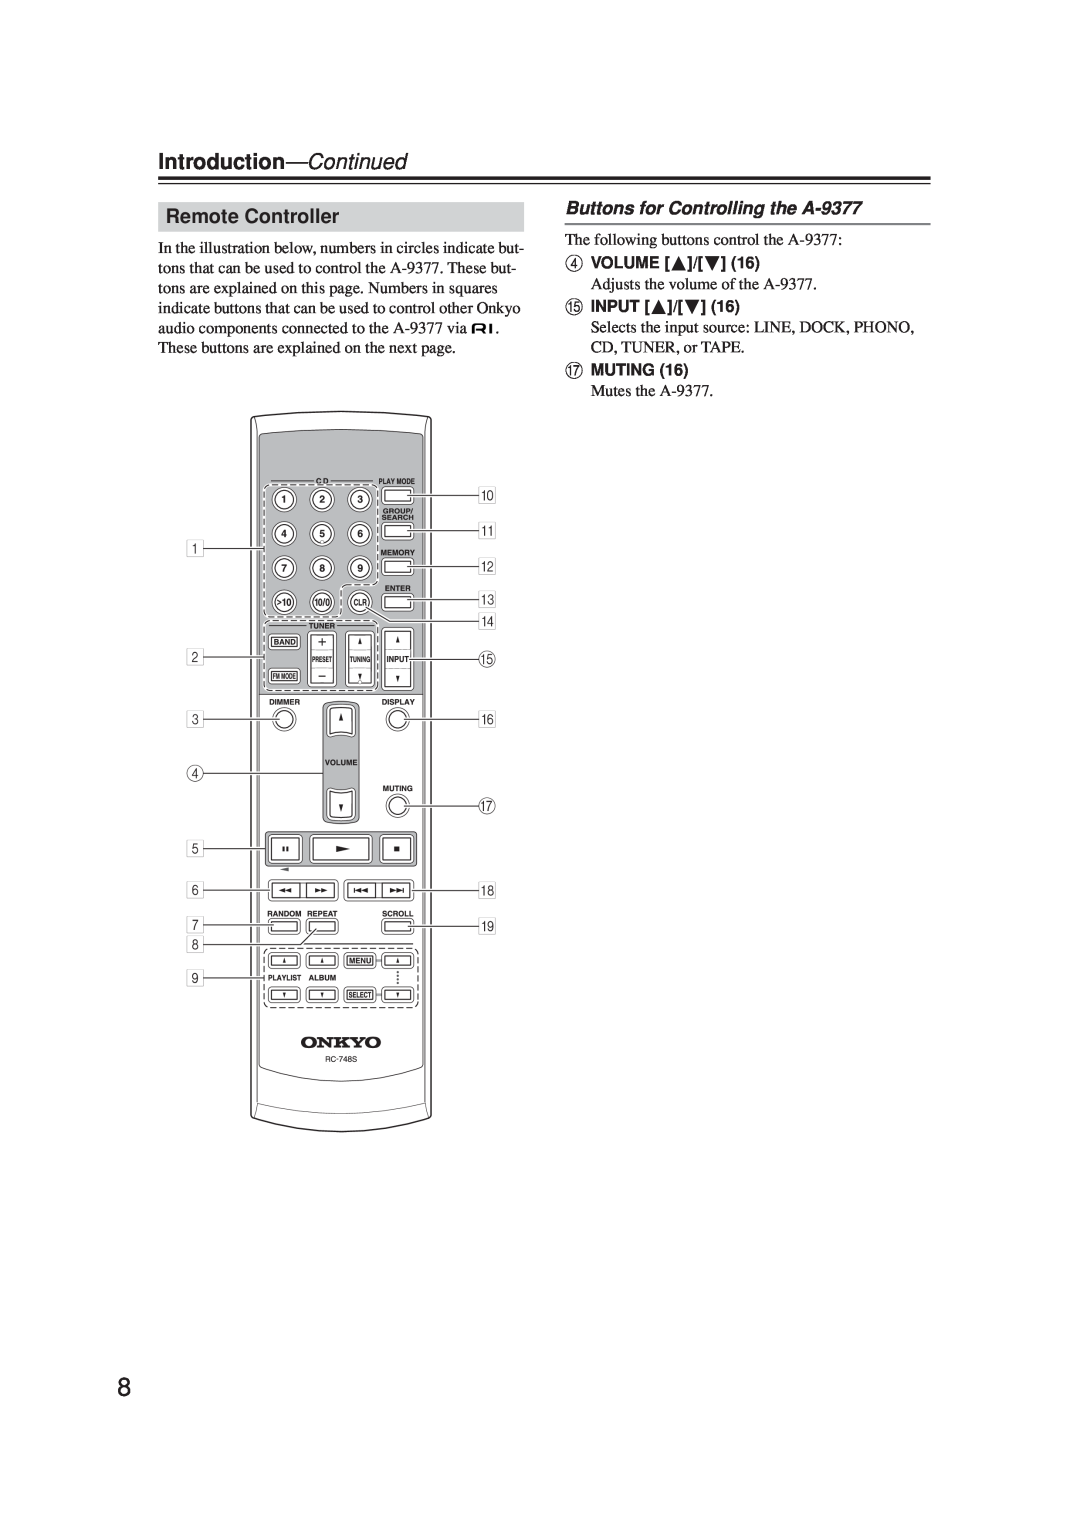 Onkyo Remote Controller, Buttons for Controlling the A-9377, Introduction-Continued, 0 A 1 B C D 2O 3F, 5 6H 